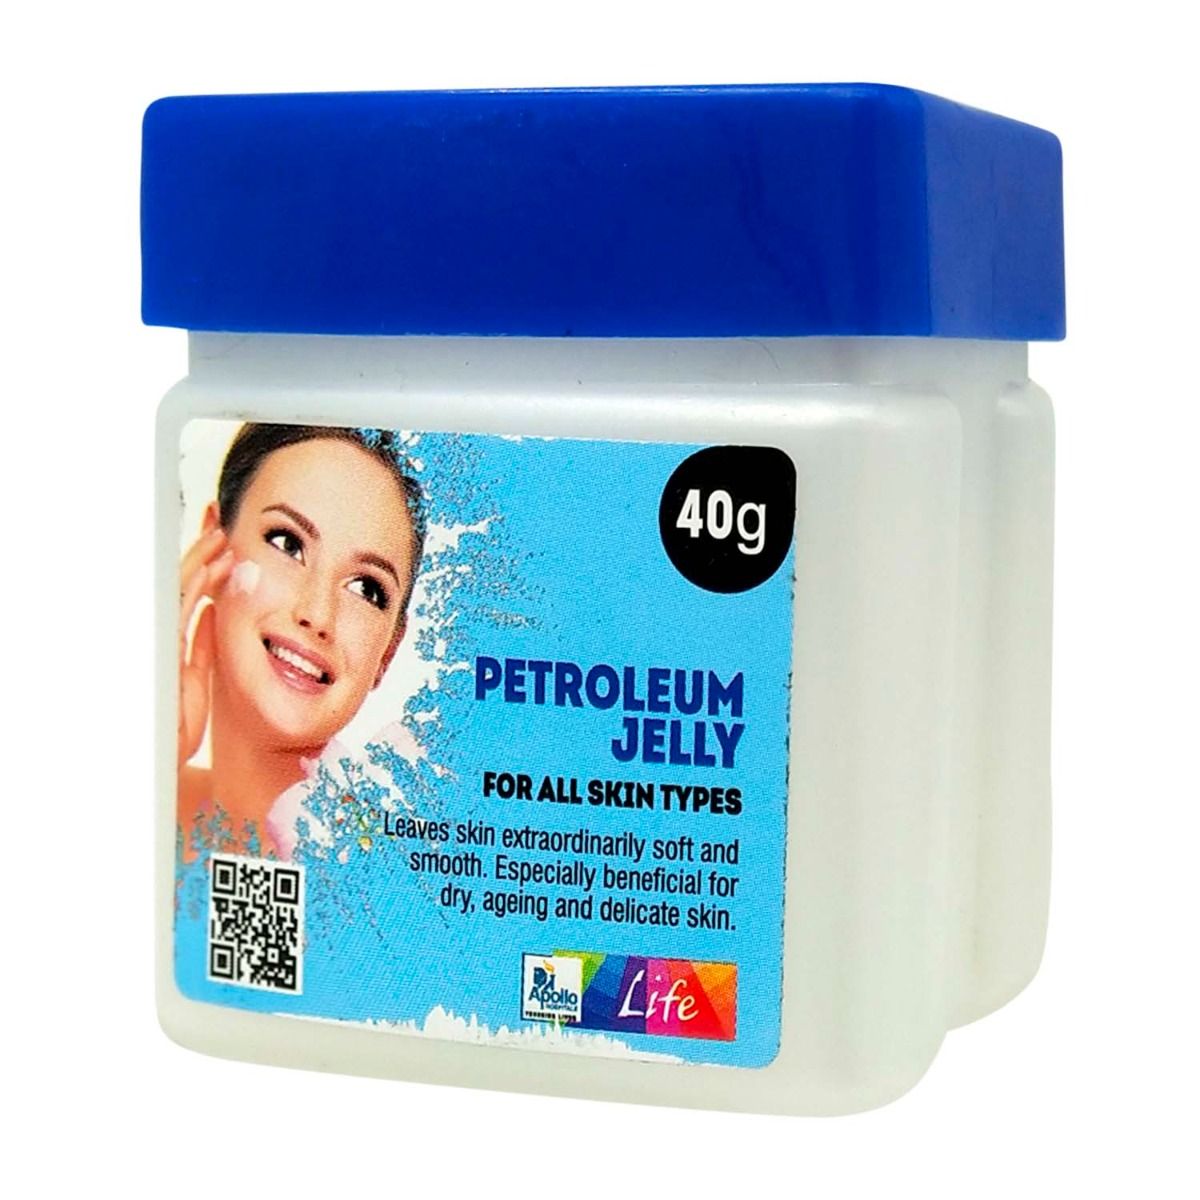 Apollo Life Petroleum Jelly, 40 gm, Pack of 1 